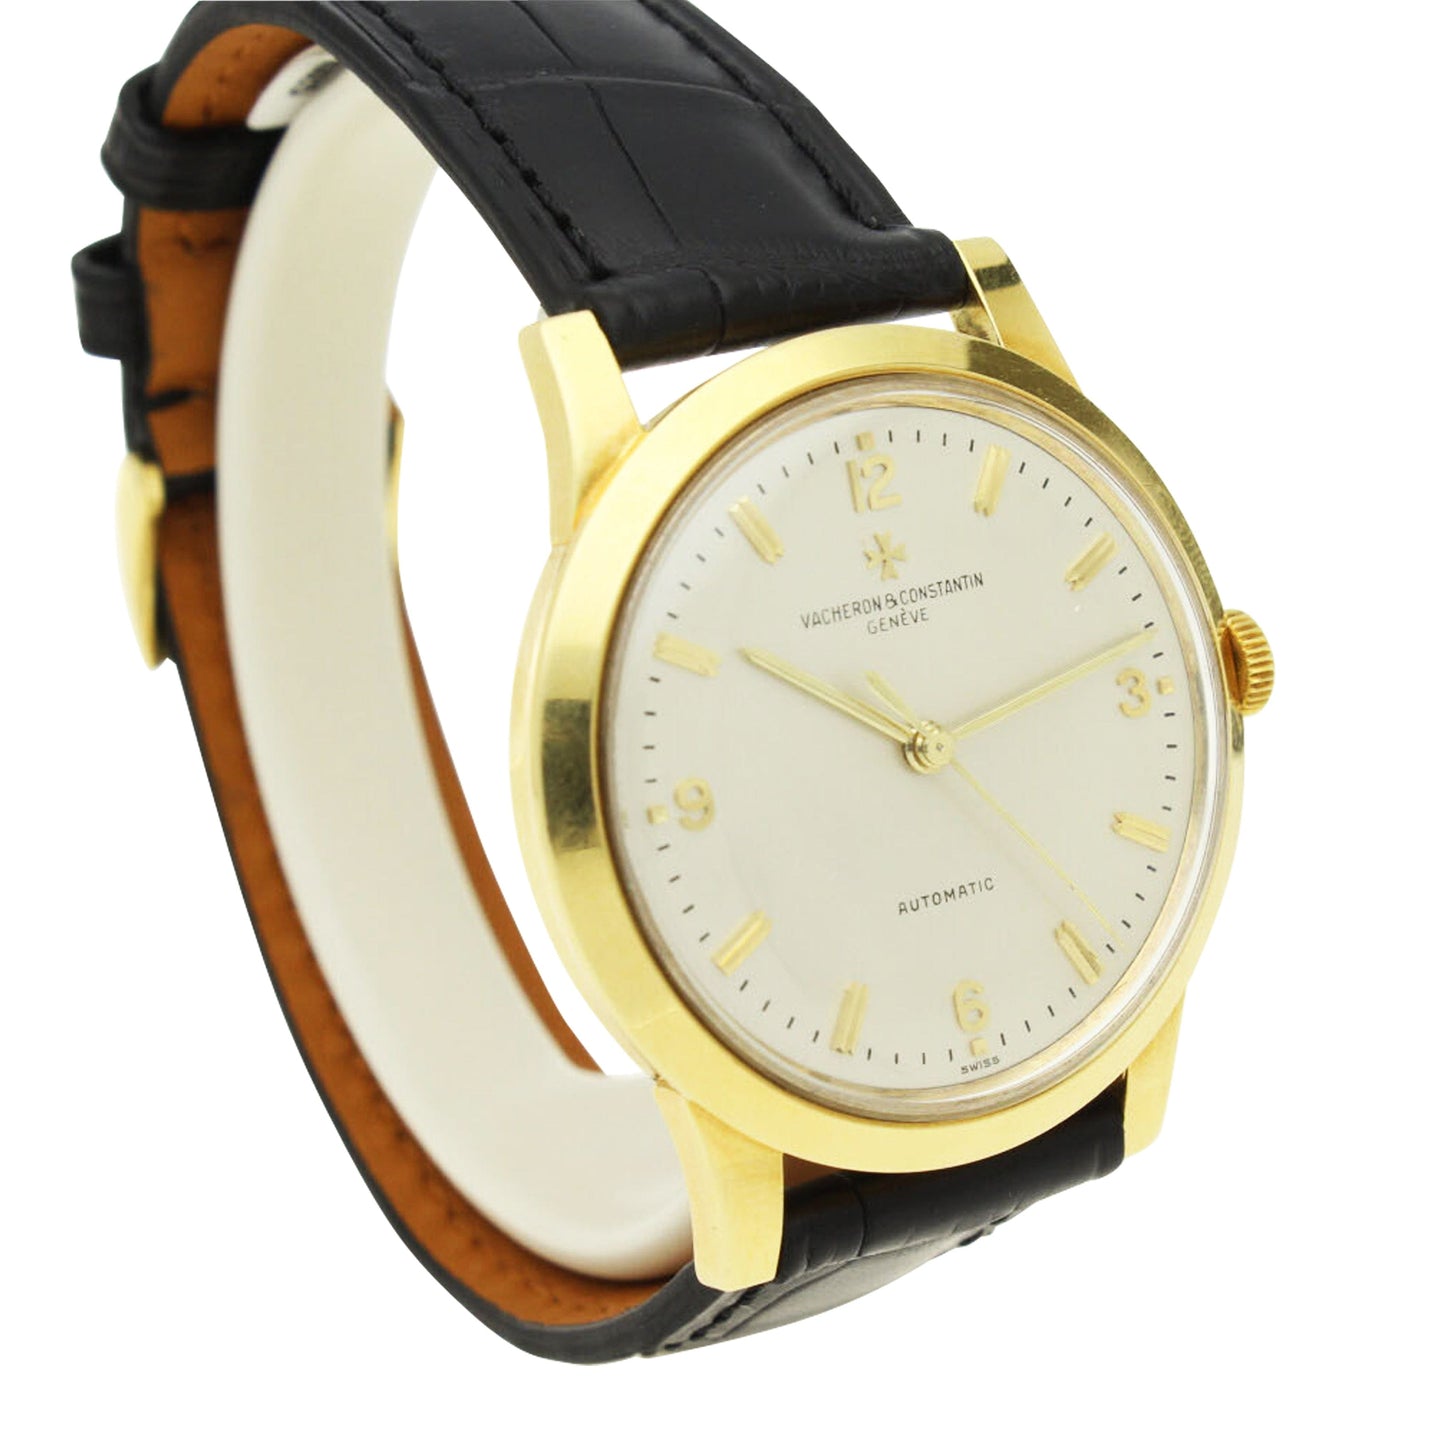 18ct yellow gold, reference 6038 automatic wristwatch. Made 1950's